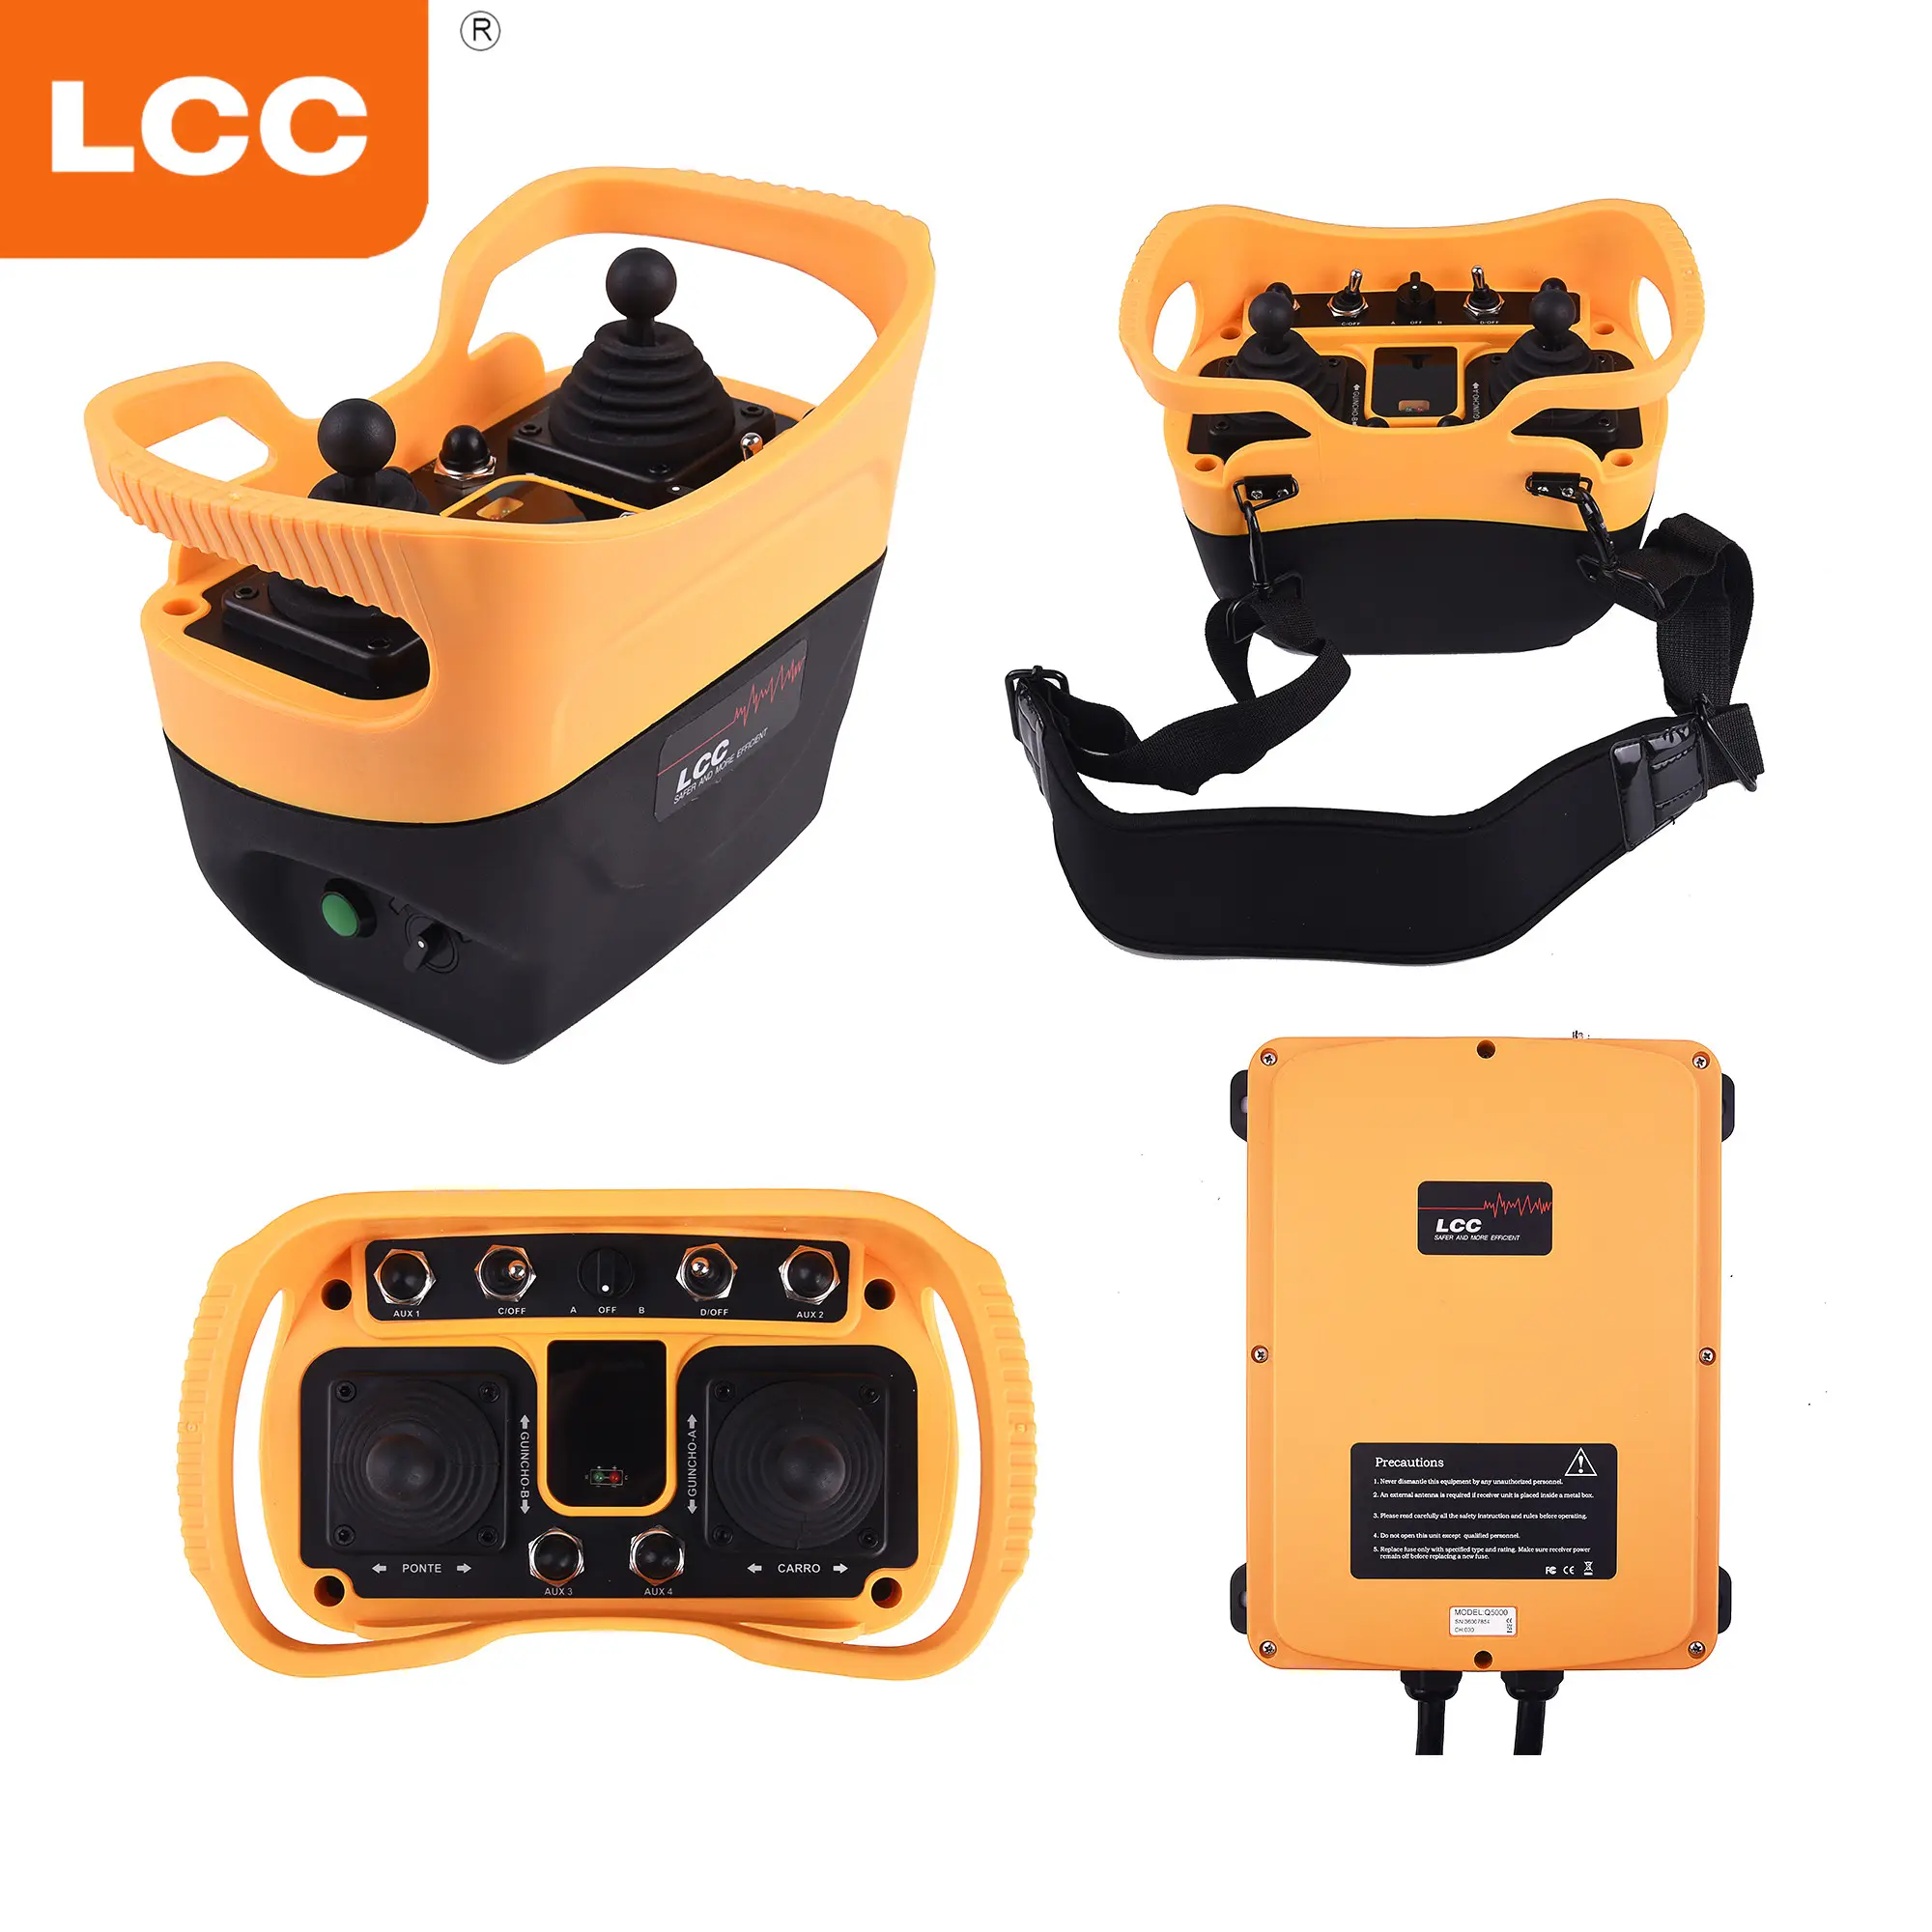 Remote Control For Truck Q5000 LCC Joystick Radio Hetronic Remote Control For Concrete Pump Truck Car Cable Cutter